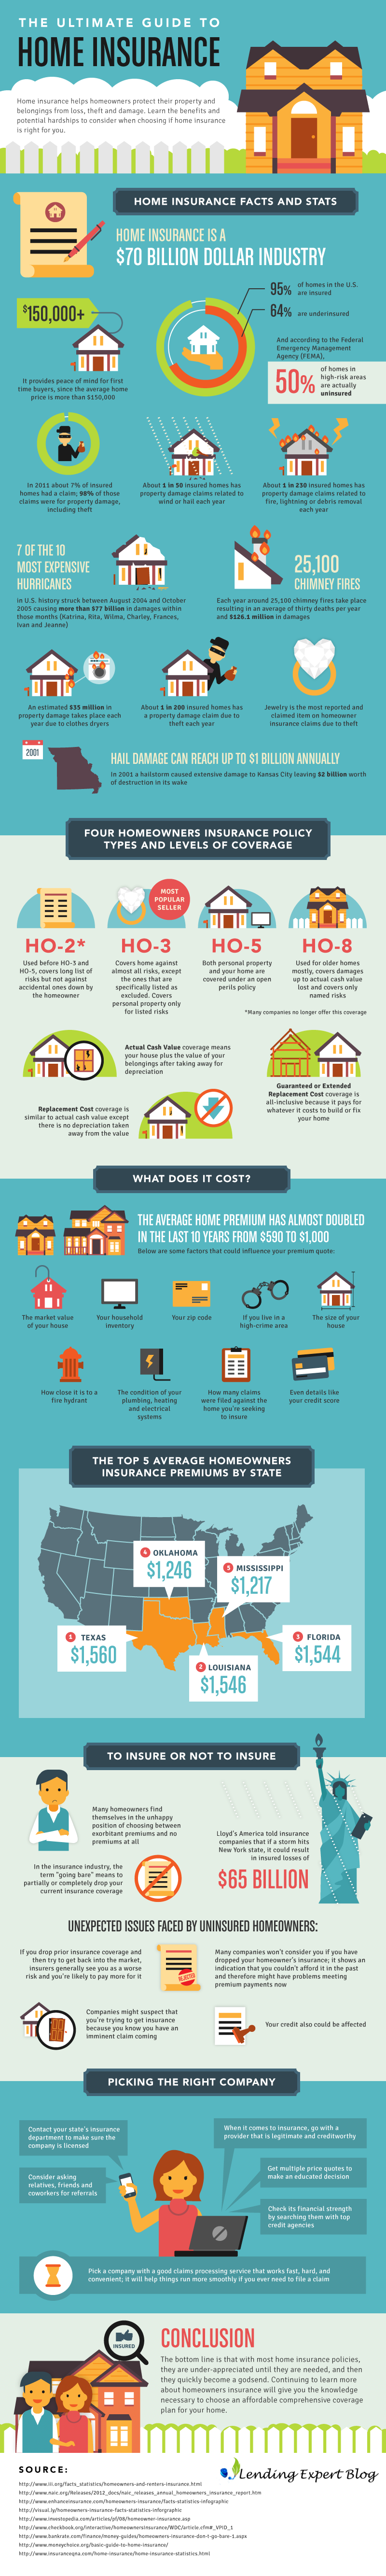 Home Insurance 101-Infographic